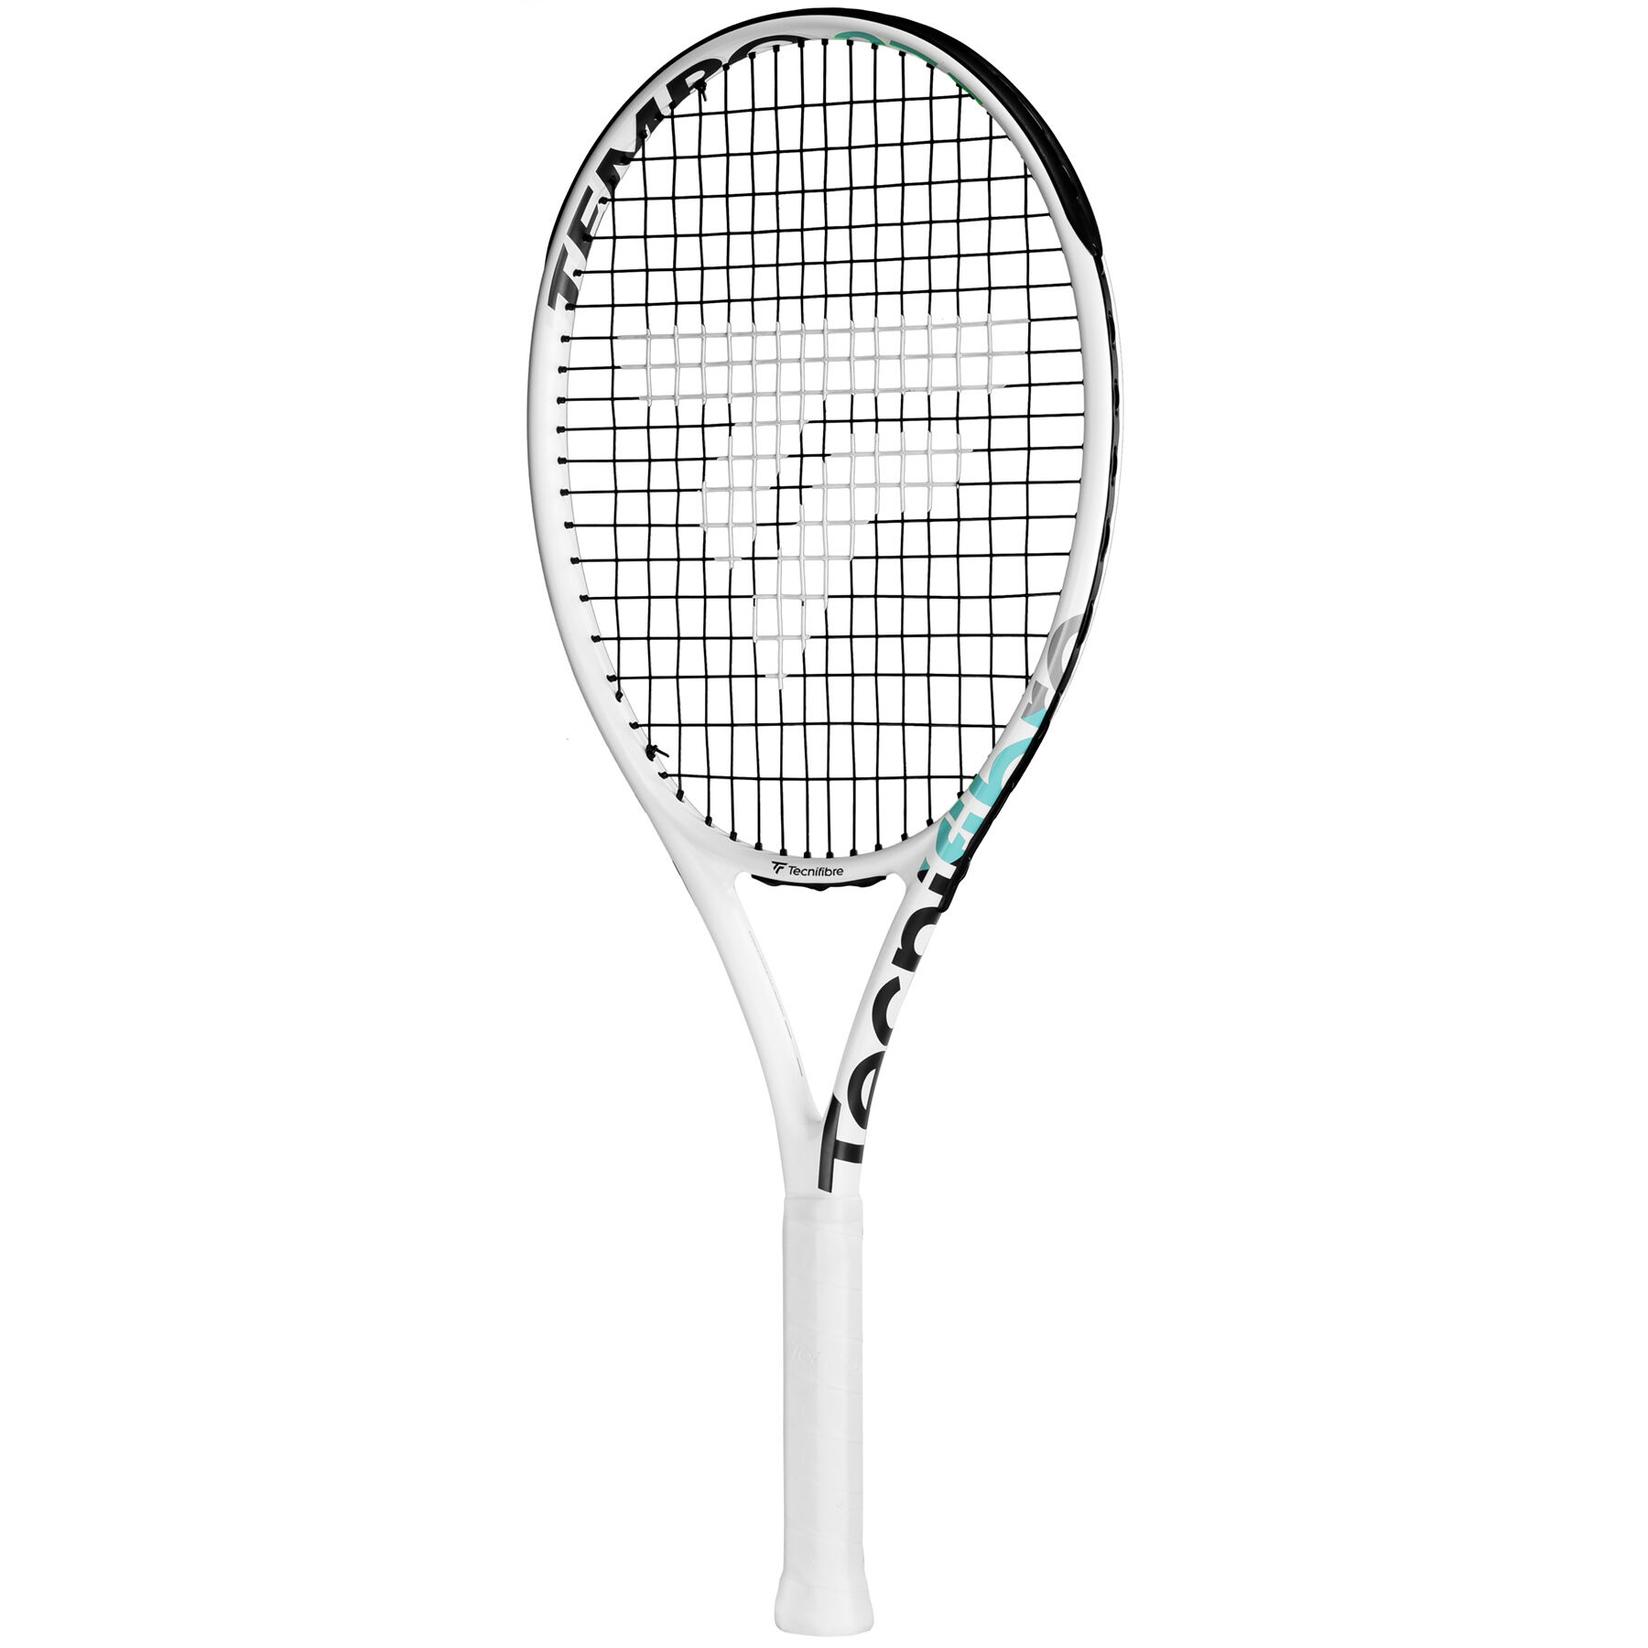 Selected image for TECNIFIBRE Reket Tempo 275 G2